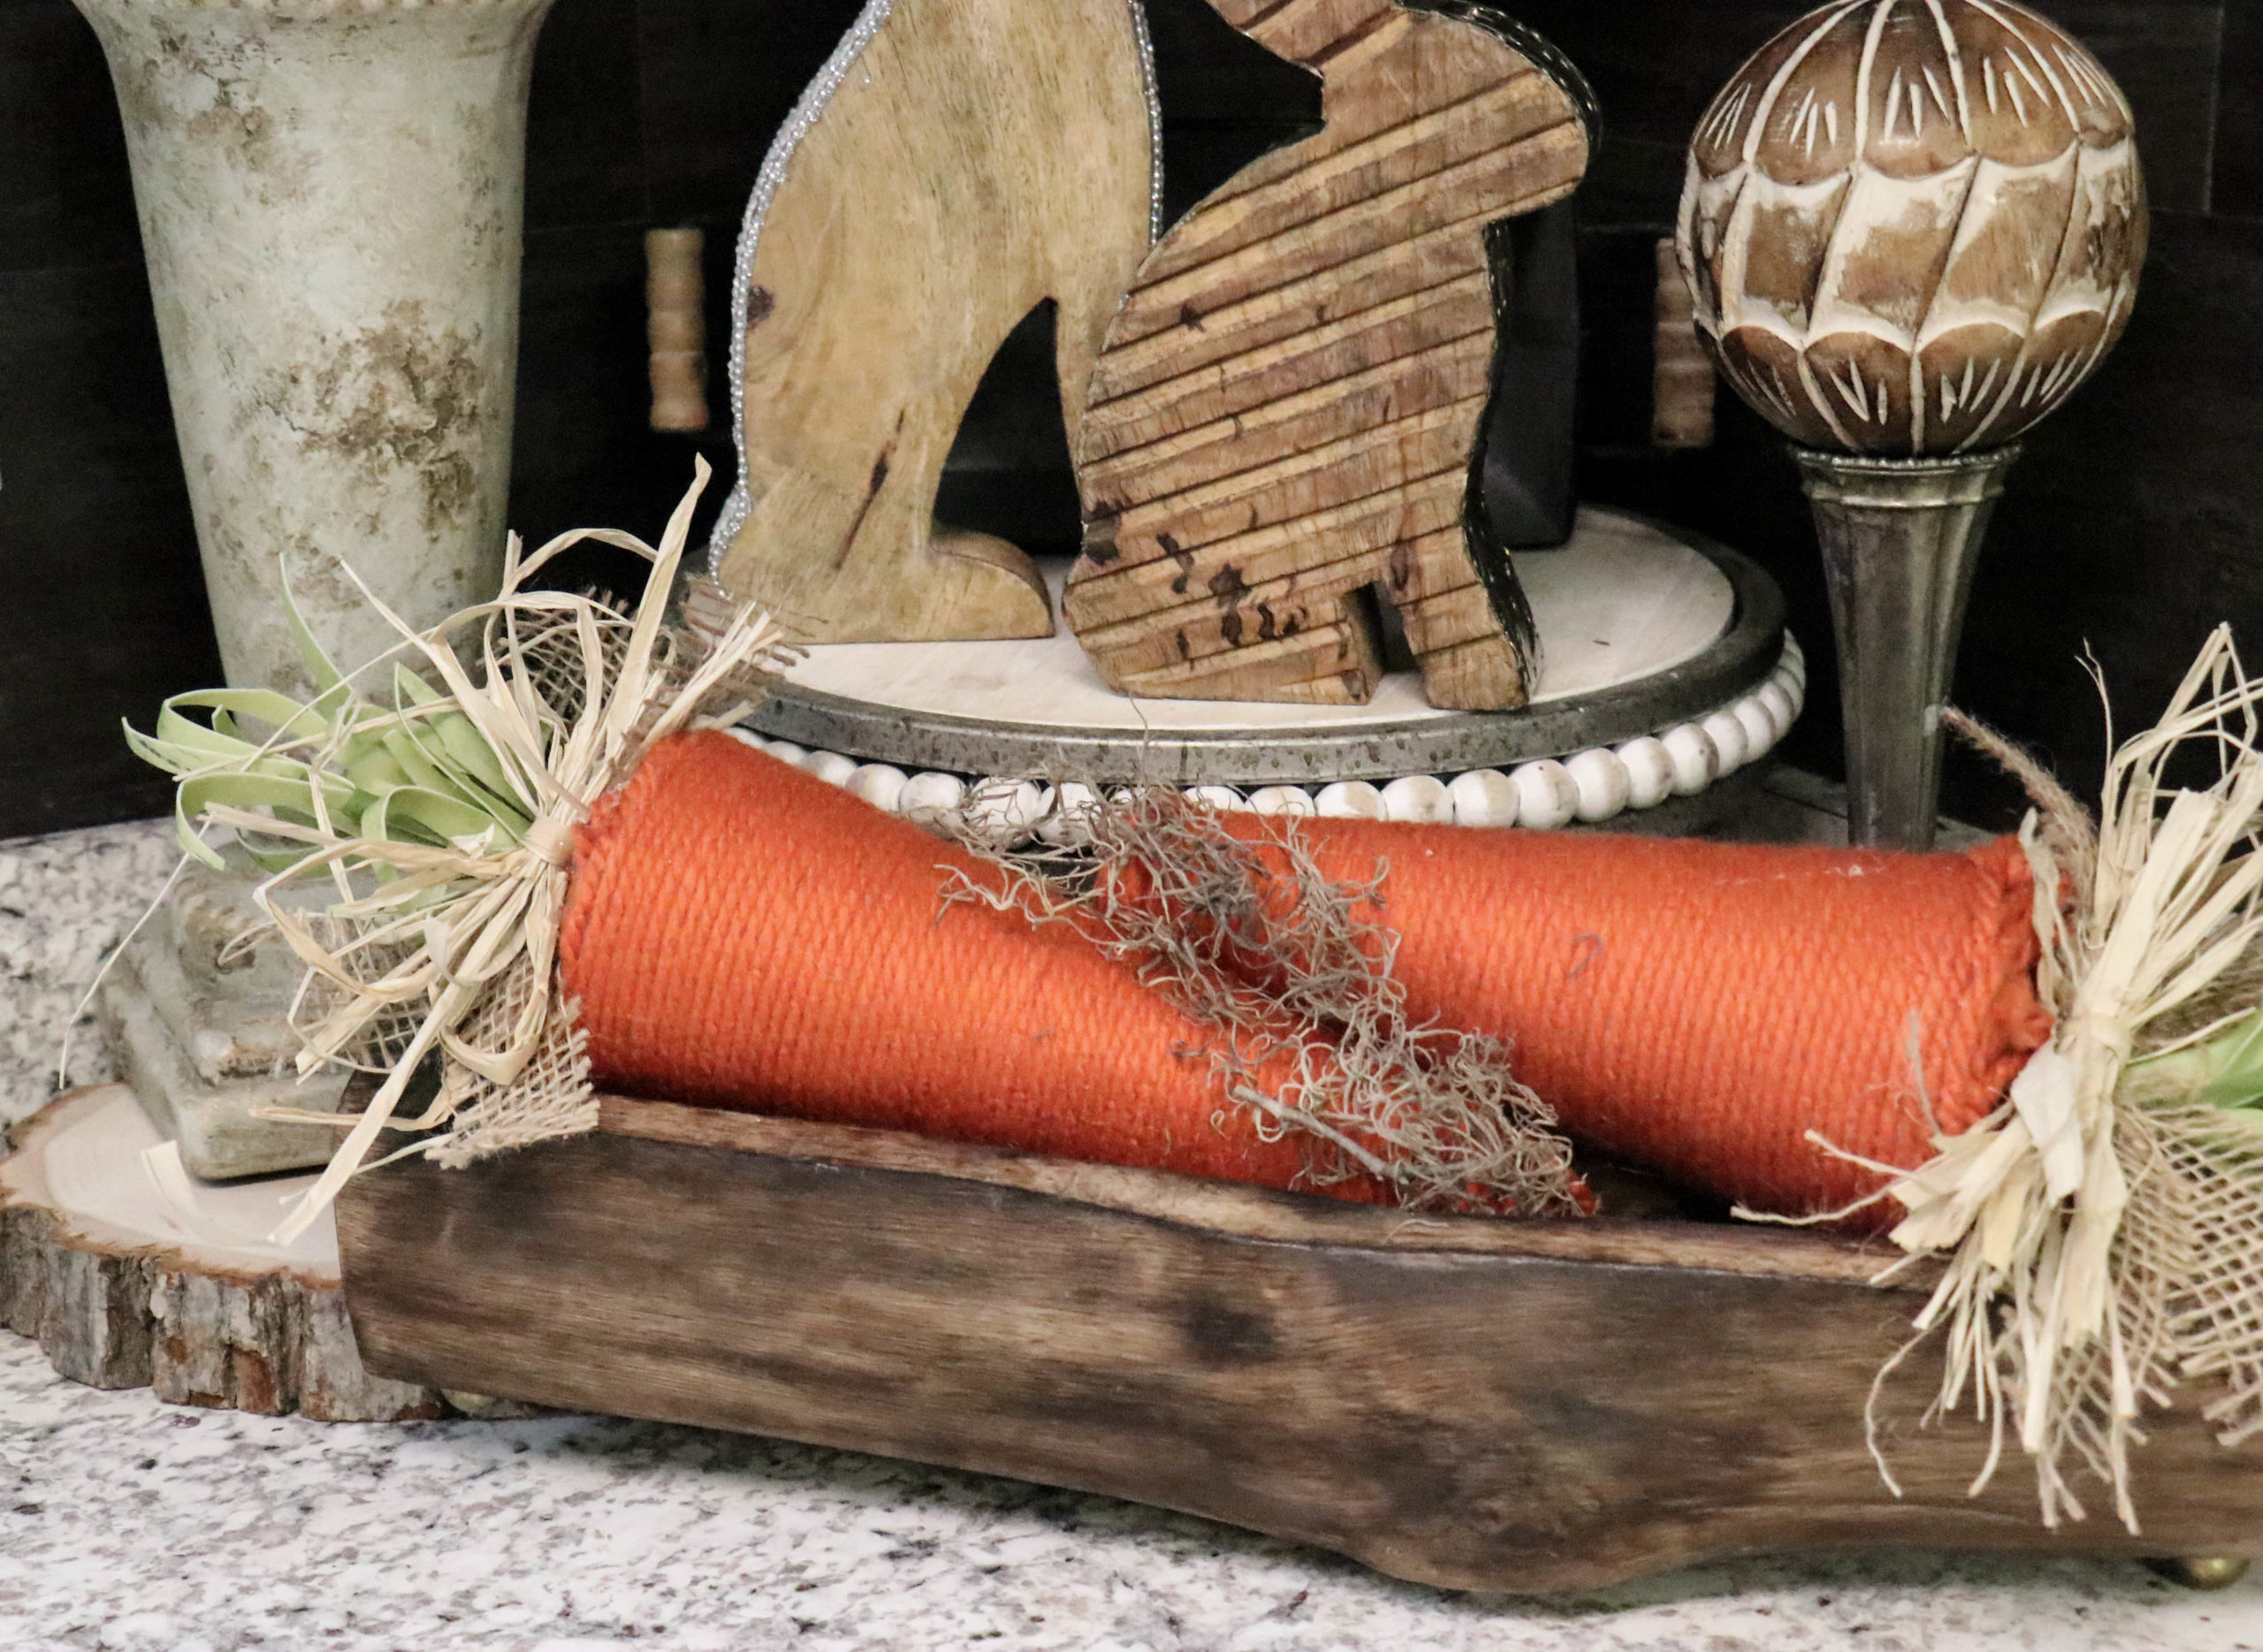 How to Make a Carrot from a Styrofoam Cone - My Eclectic Treasures